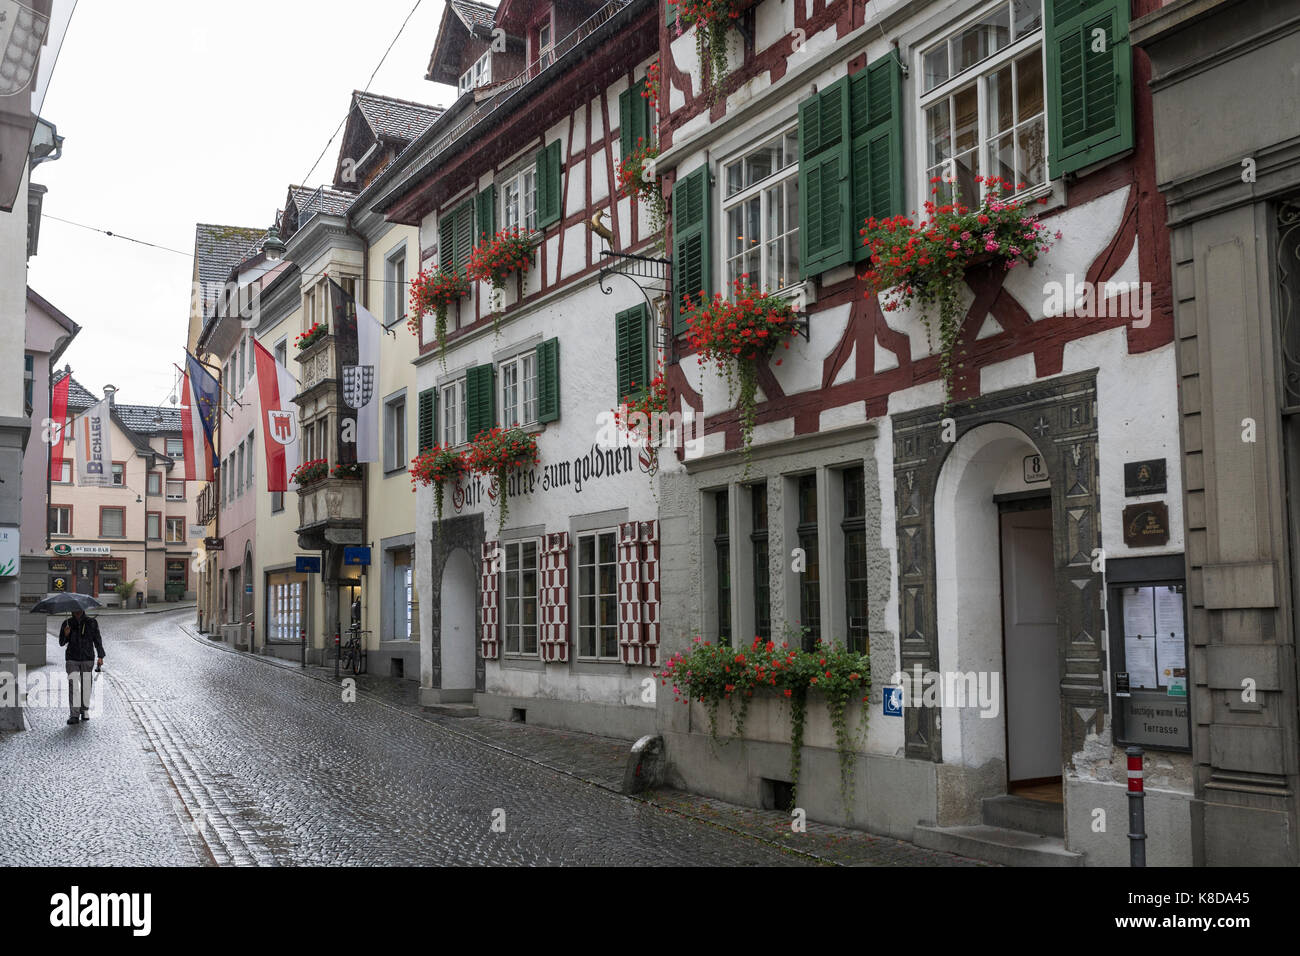 Man walking in a street with half timbered houses with geraniums on the window sills, Bregenz, Austria Stock Photo